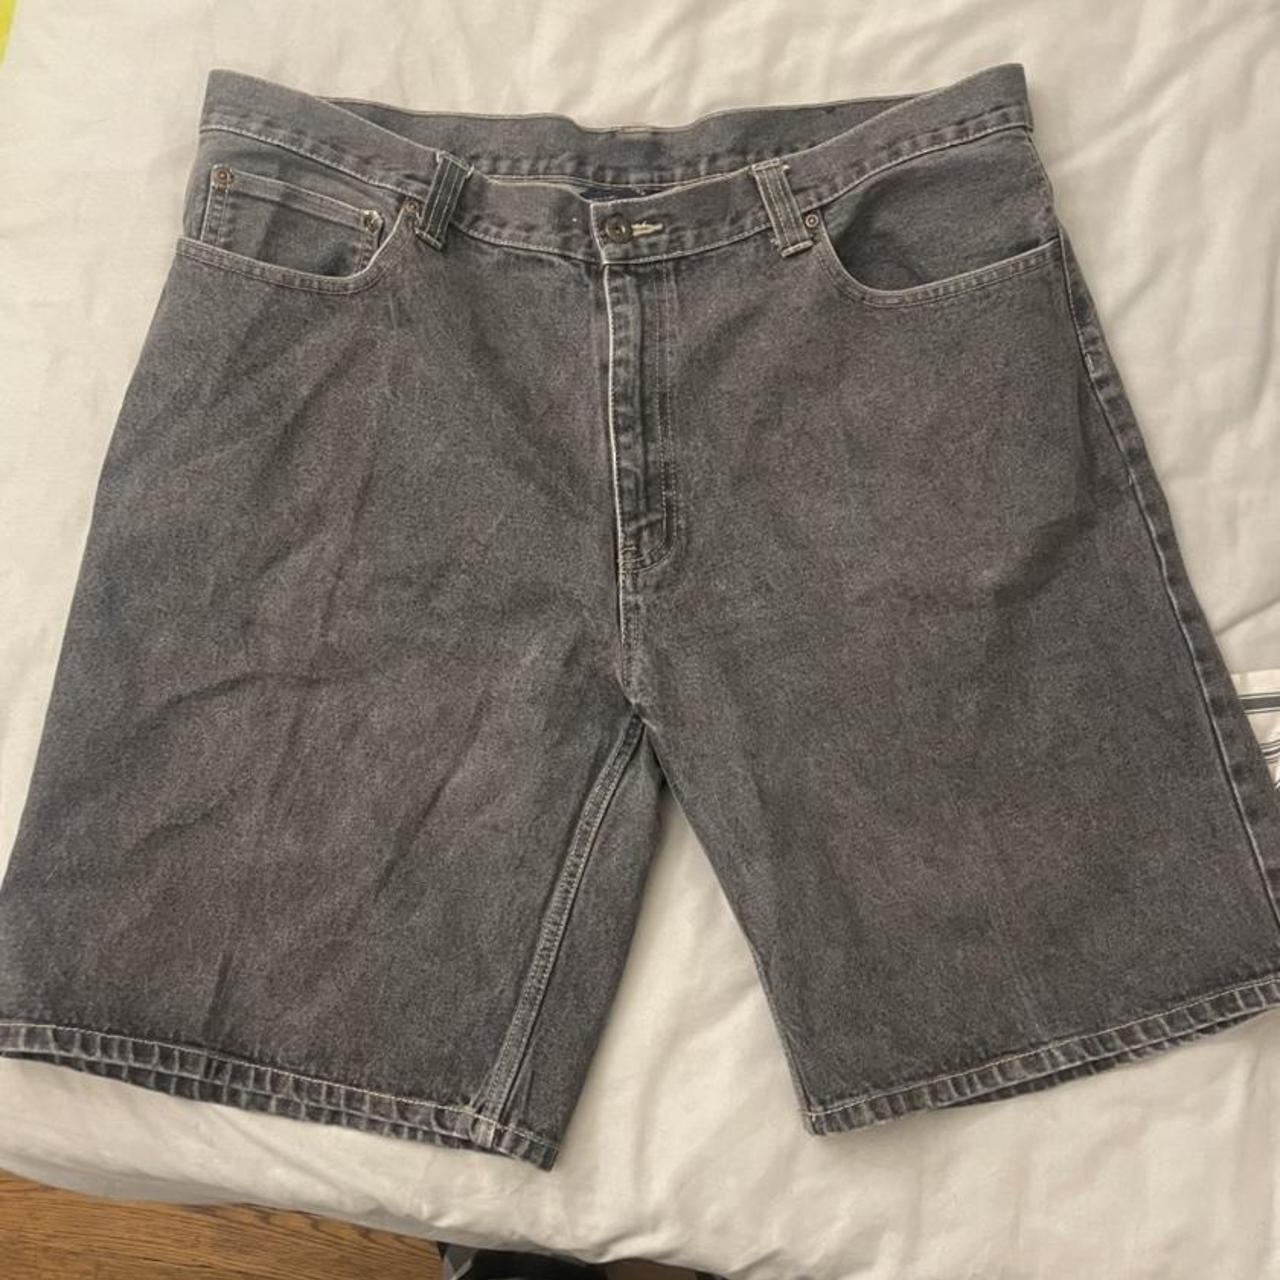 Baggy Faded Glory Jean Shorts Size 40 Washed... - Depop